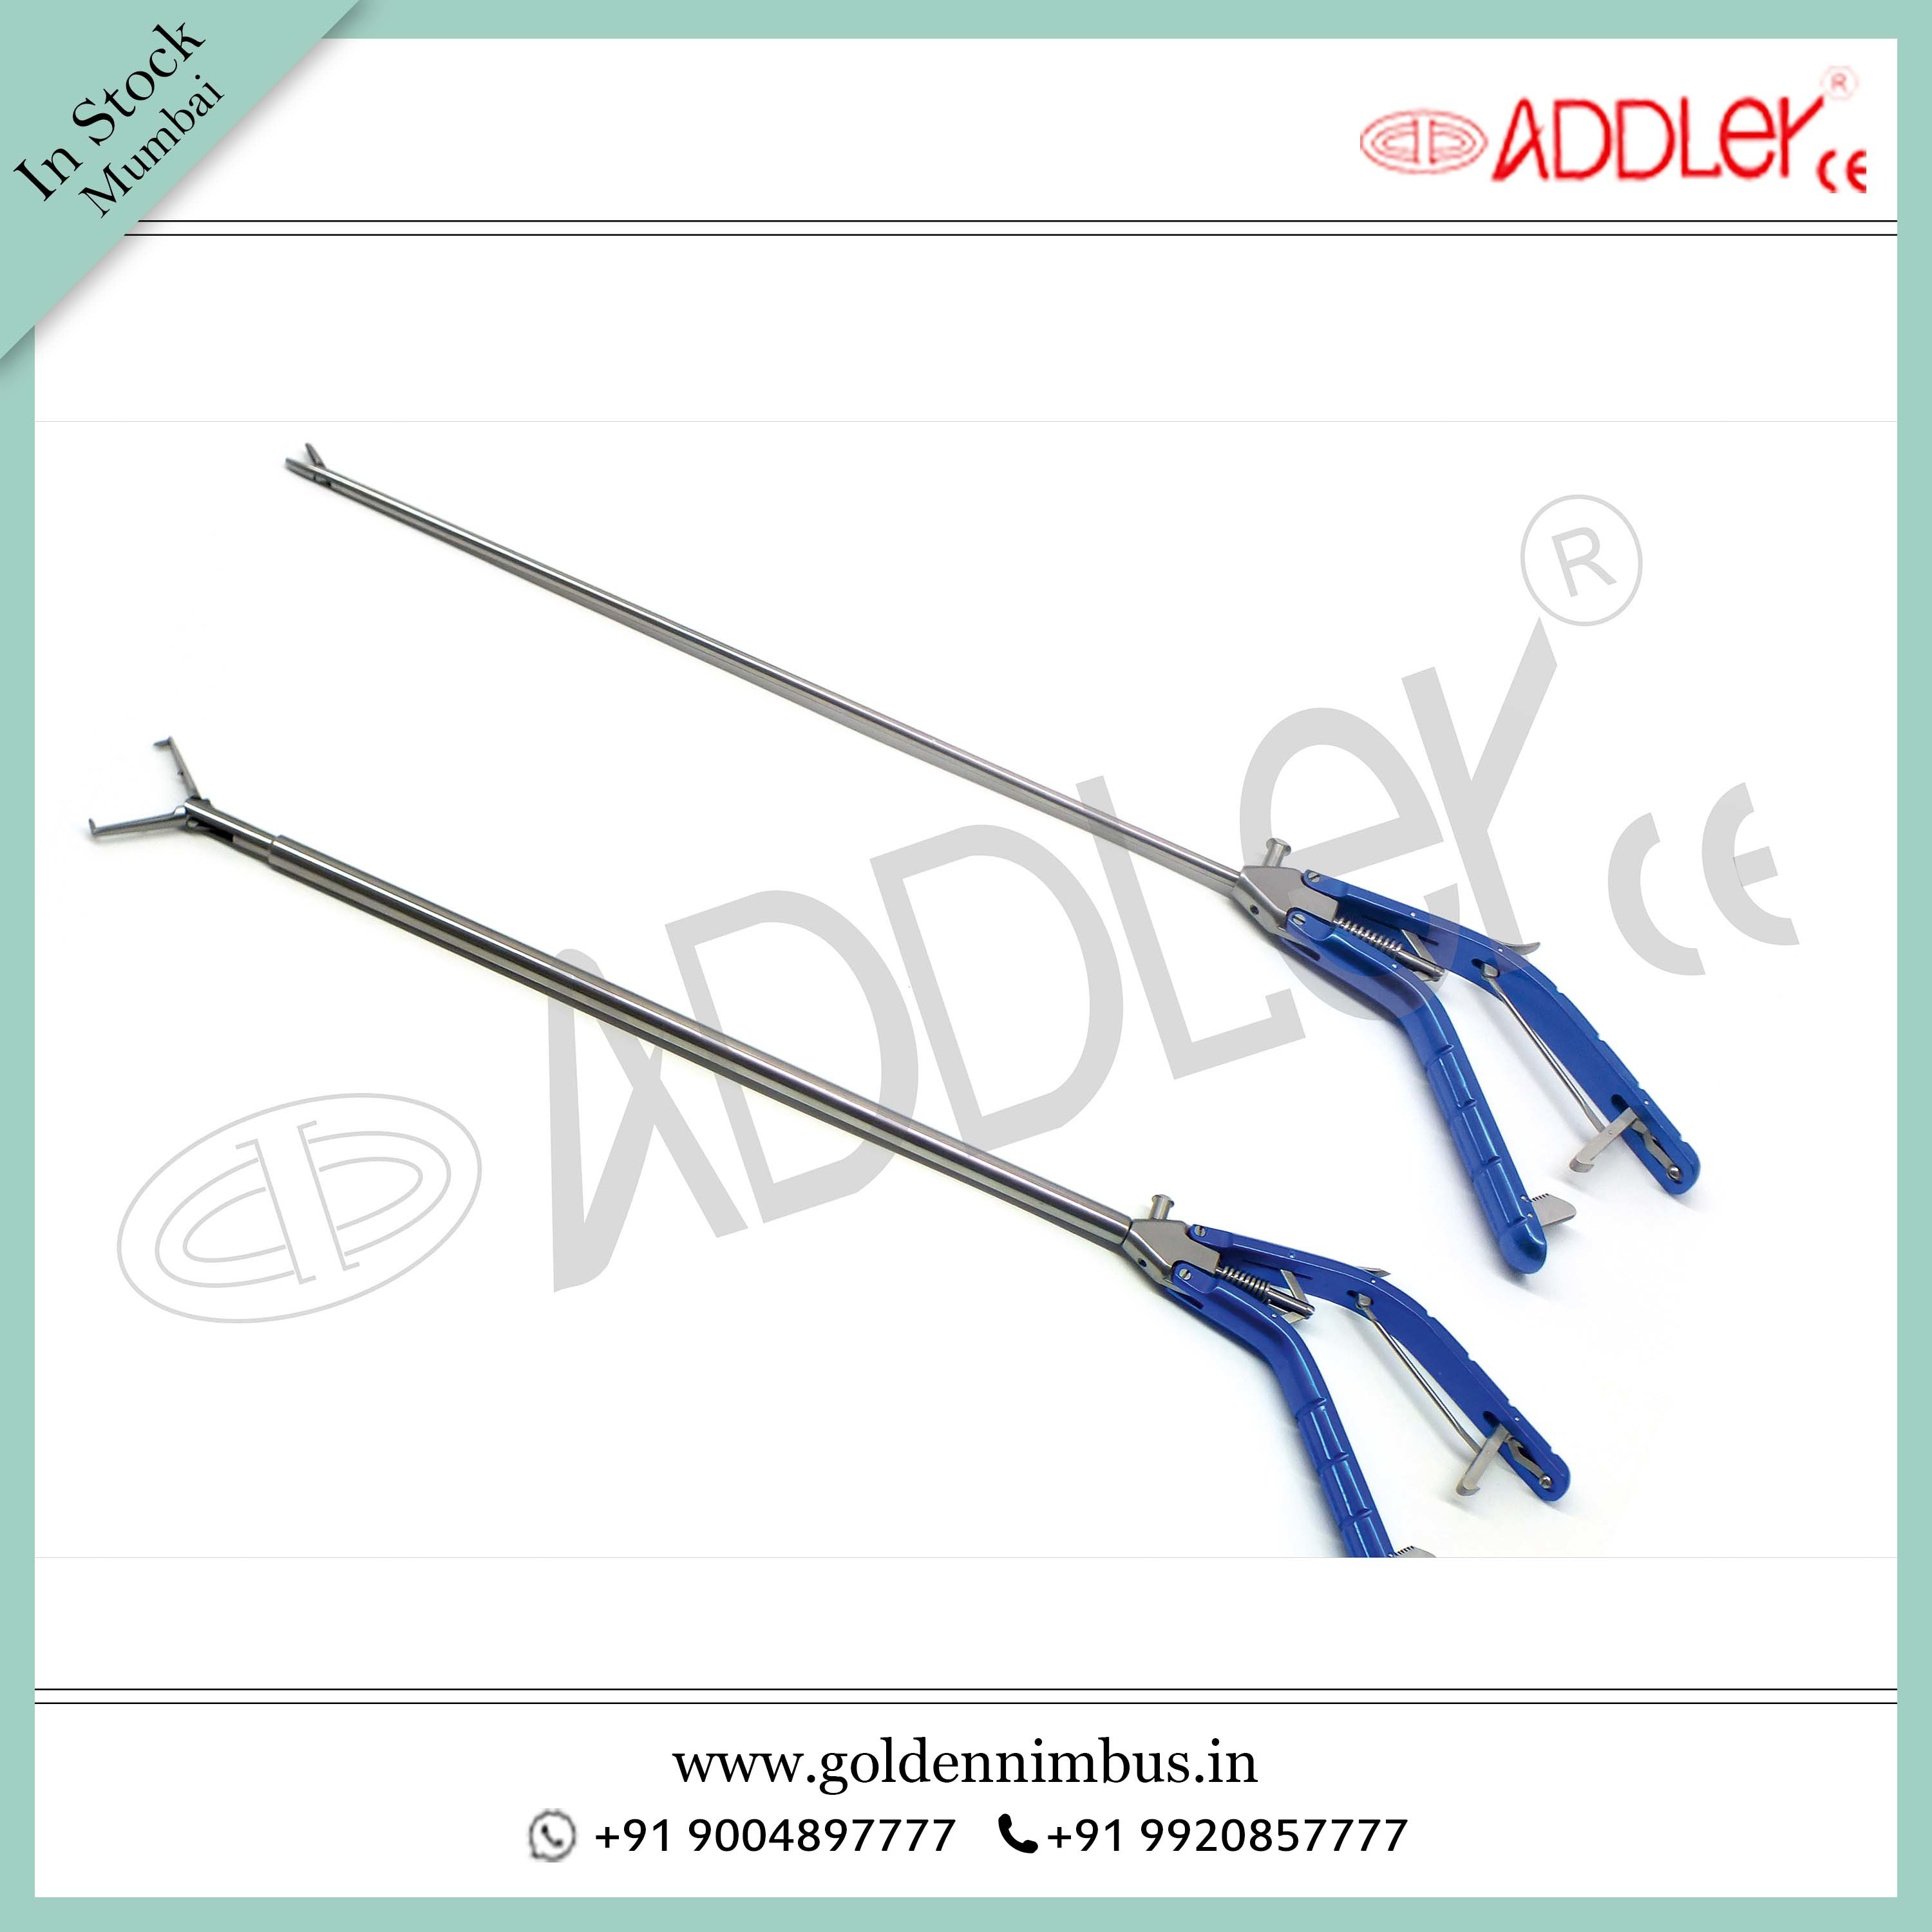 Brand New ADDLER Laparoscopic Needle Holder Straight and Tenaculum Jaw 5mm and 10mm